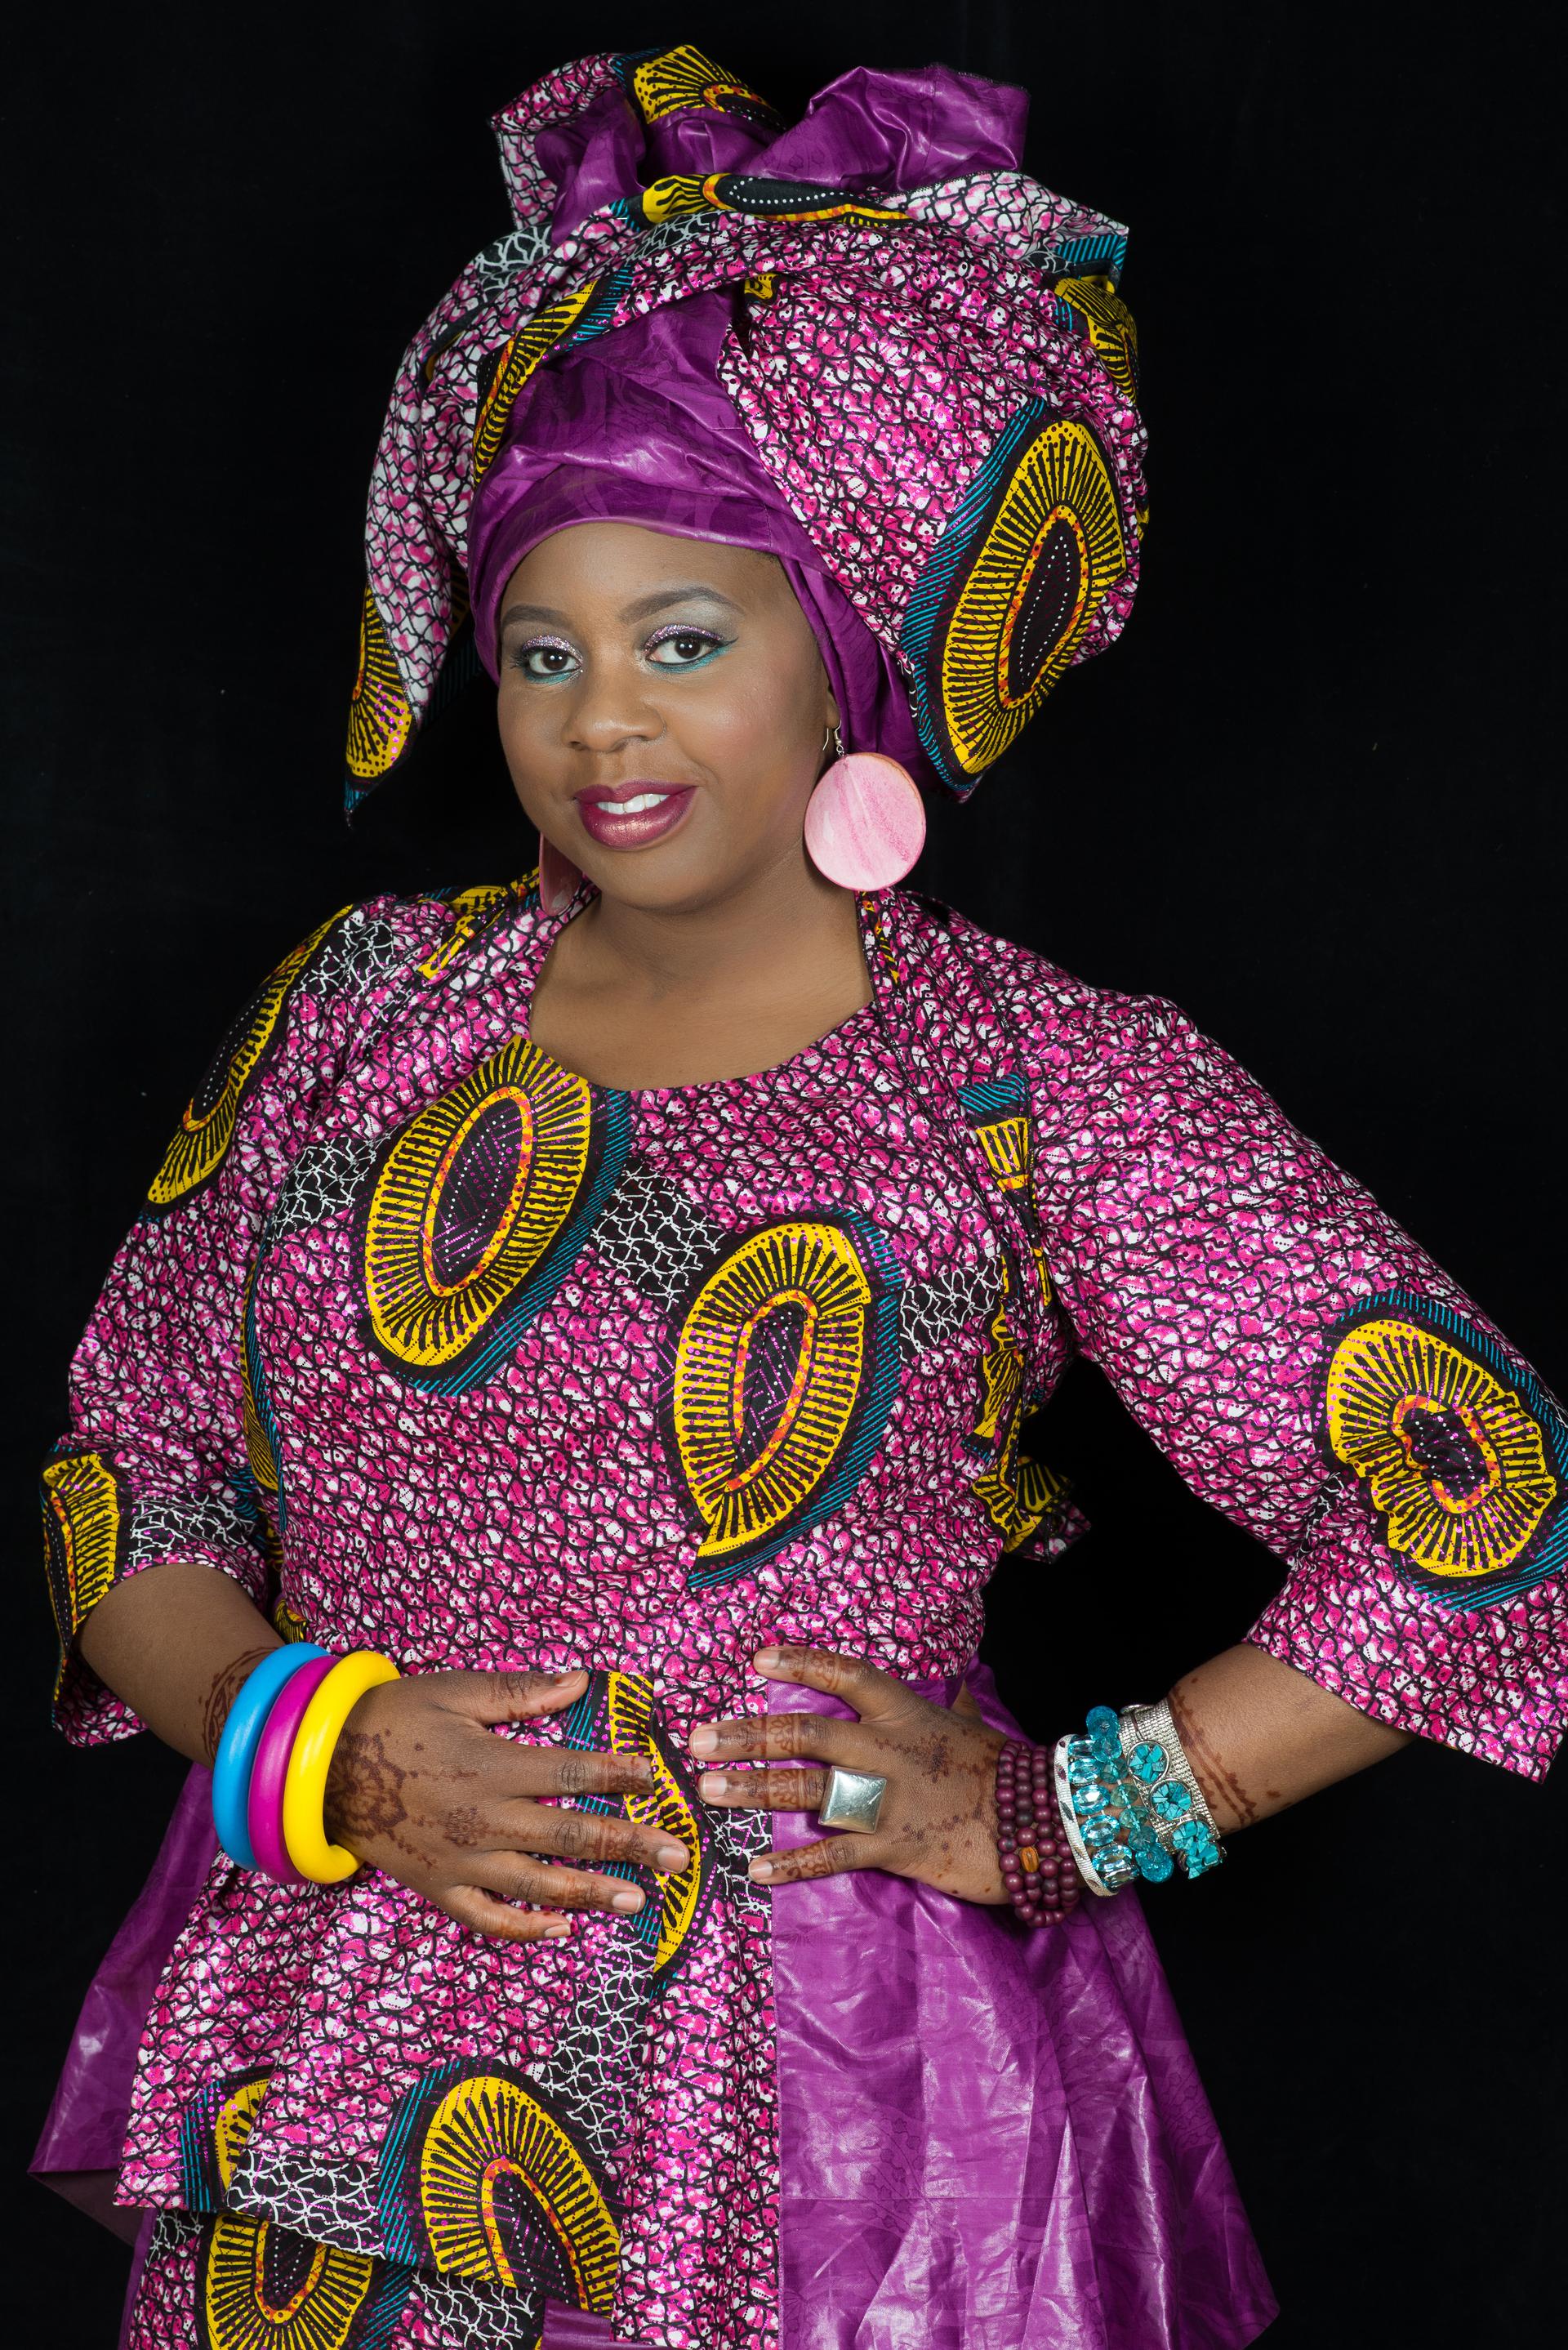 A woman is wearing a colorful pink dress and matching bright headwrap.